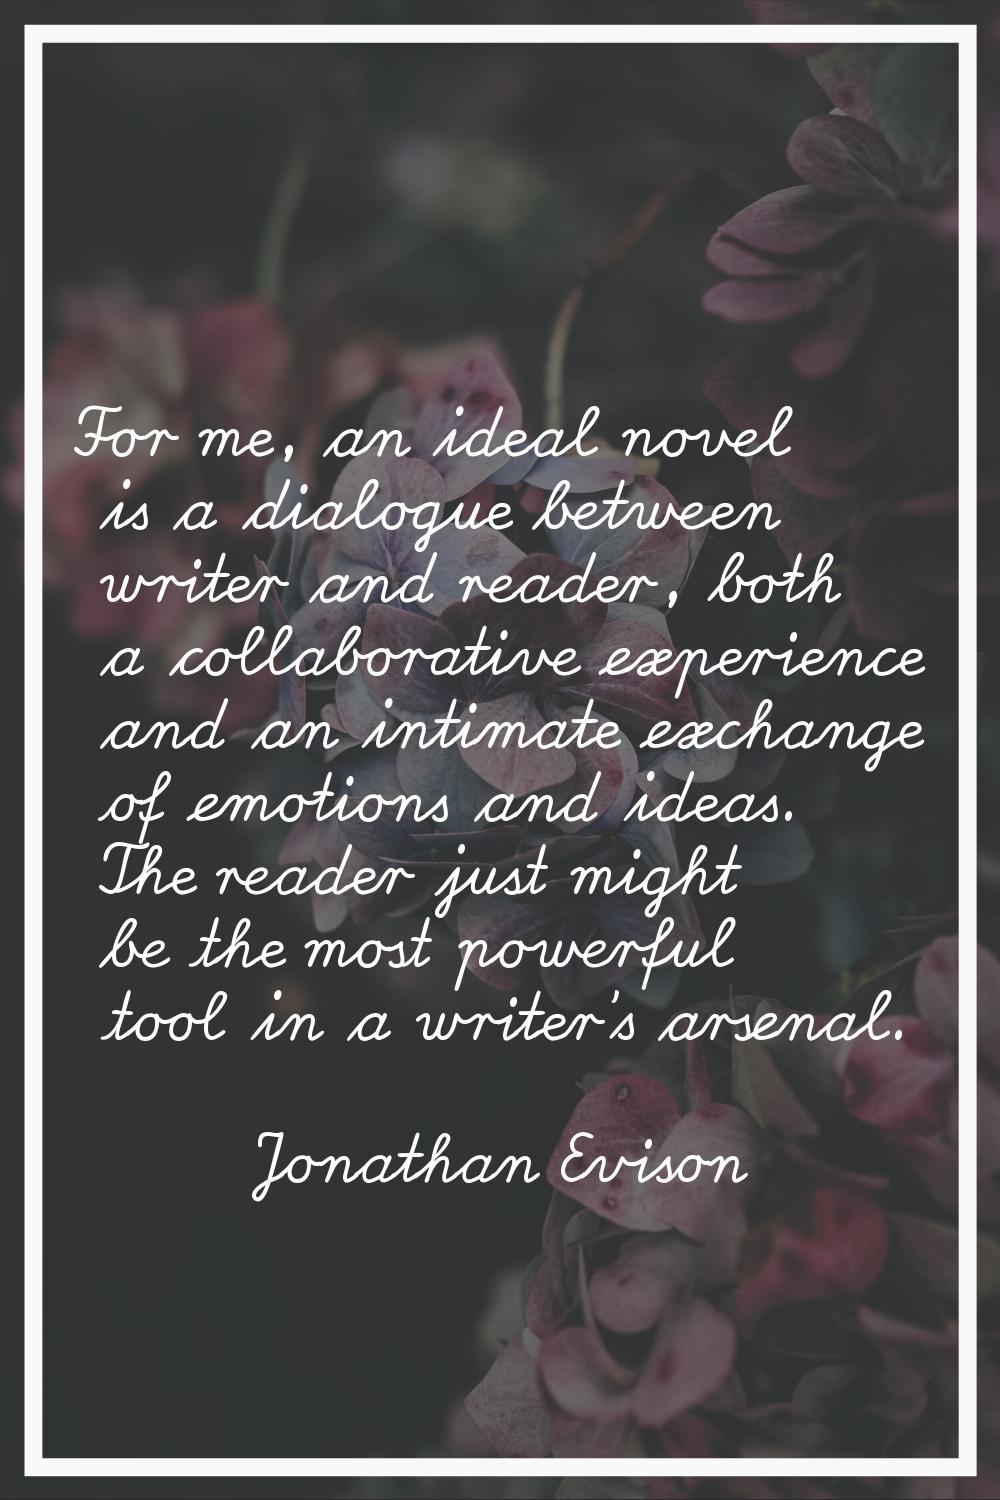 For me, an ideal novel is a dialogue between writer and reader, both a collaborative experience and